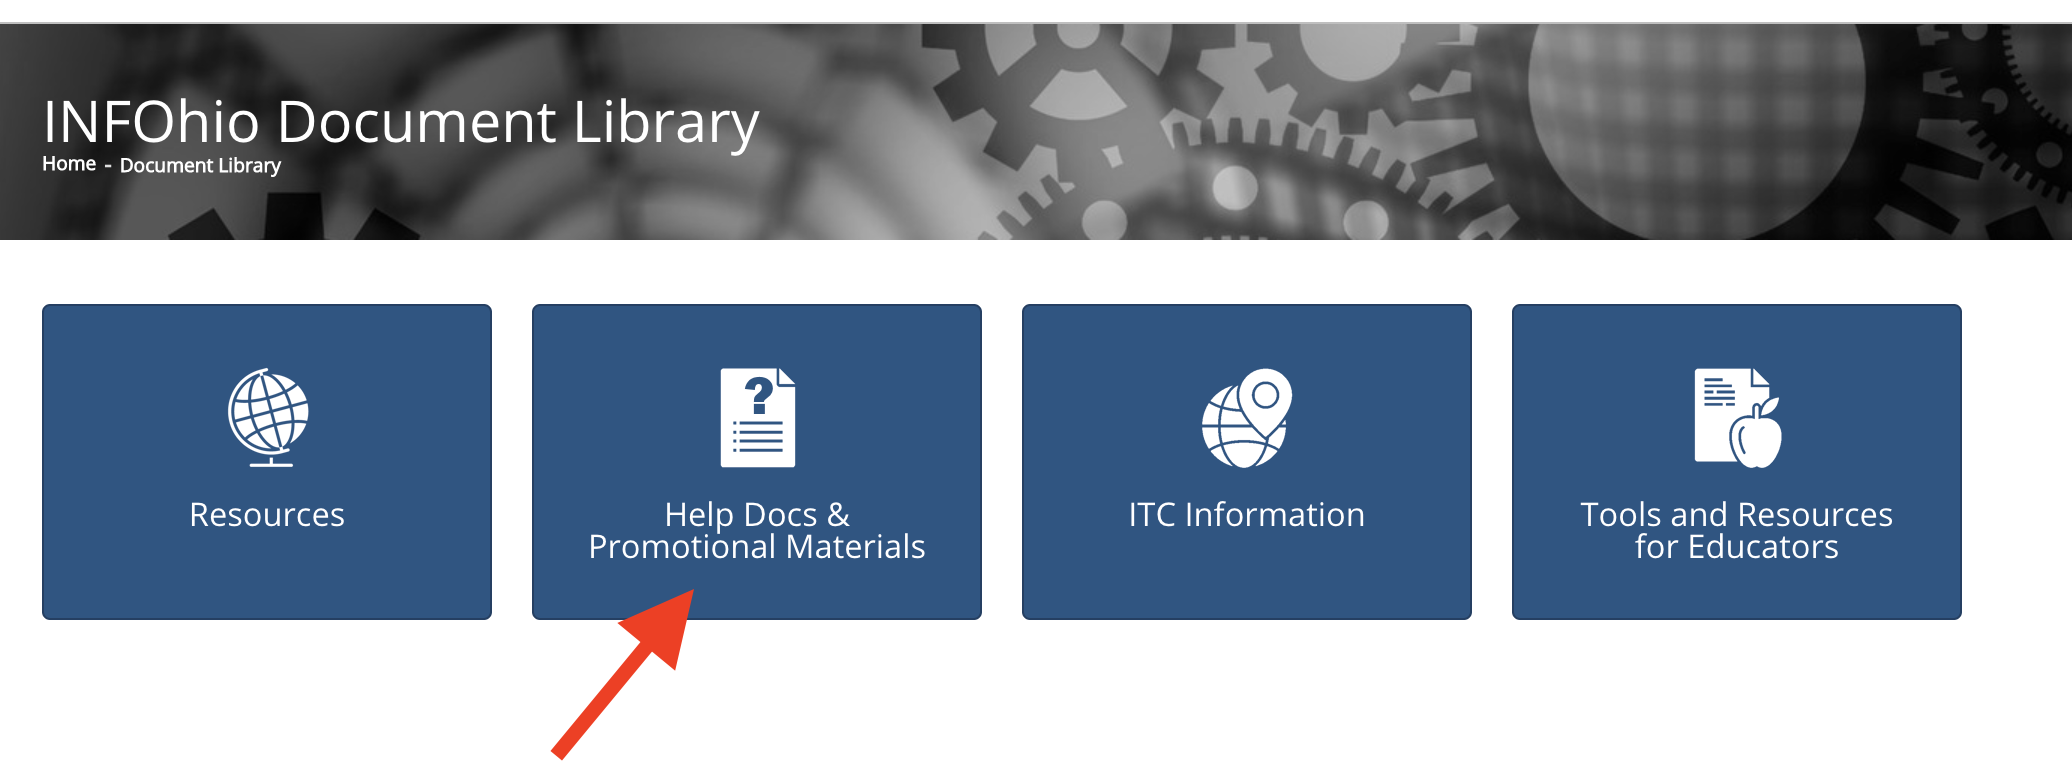 INFOhio's Document Library: Promotional Materials to Share